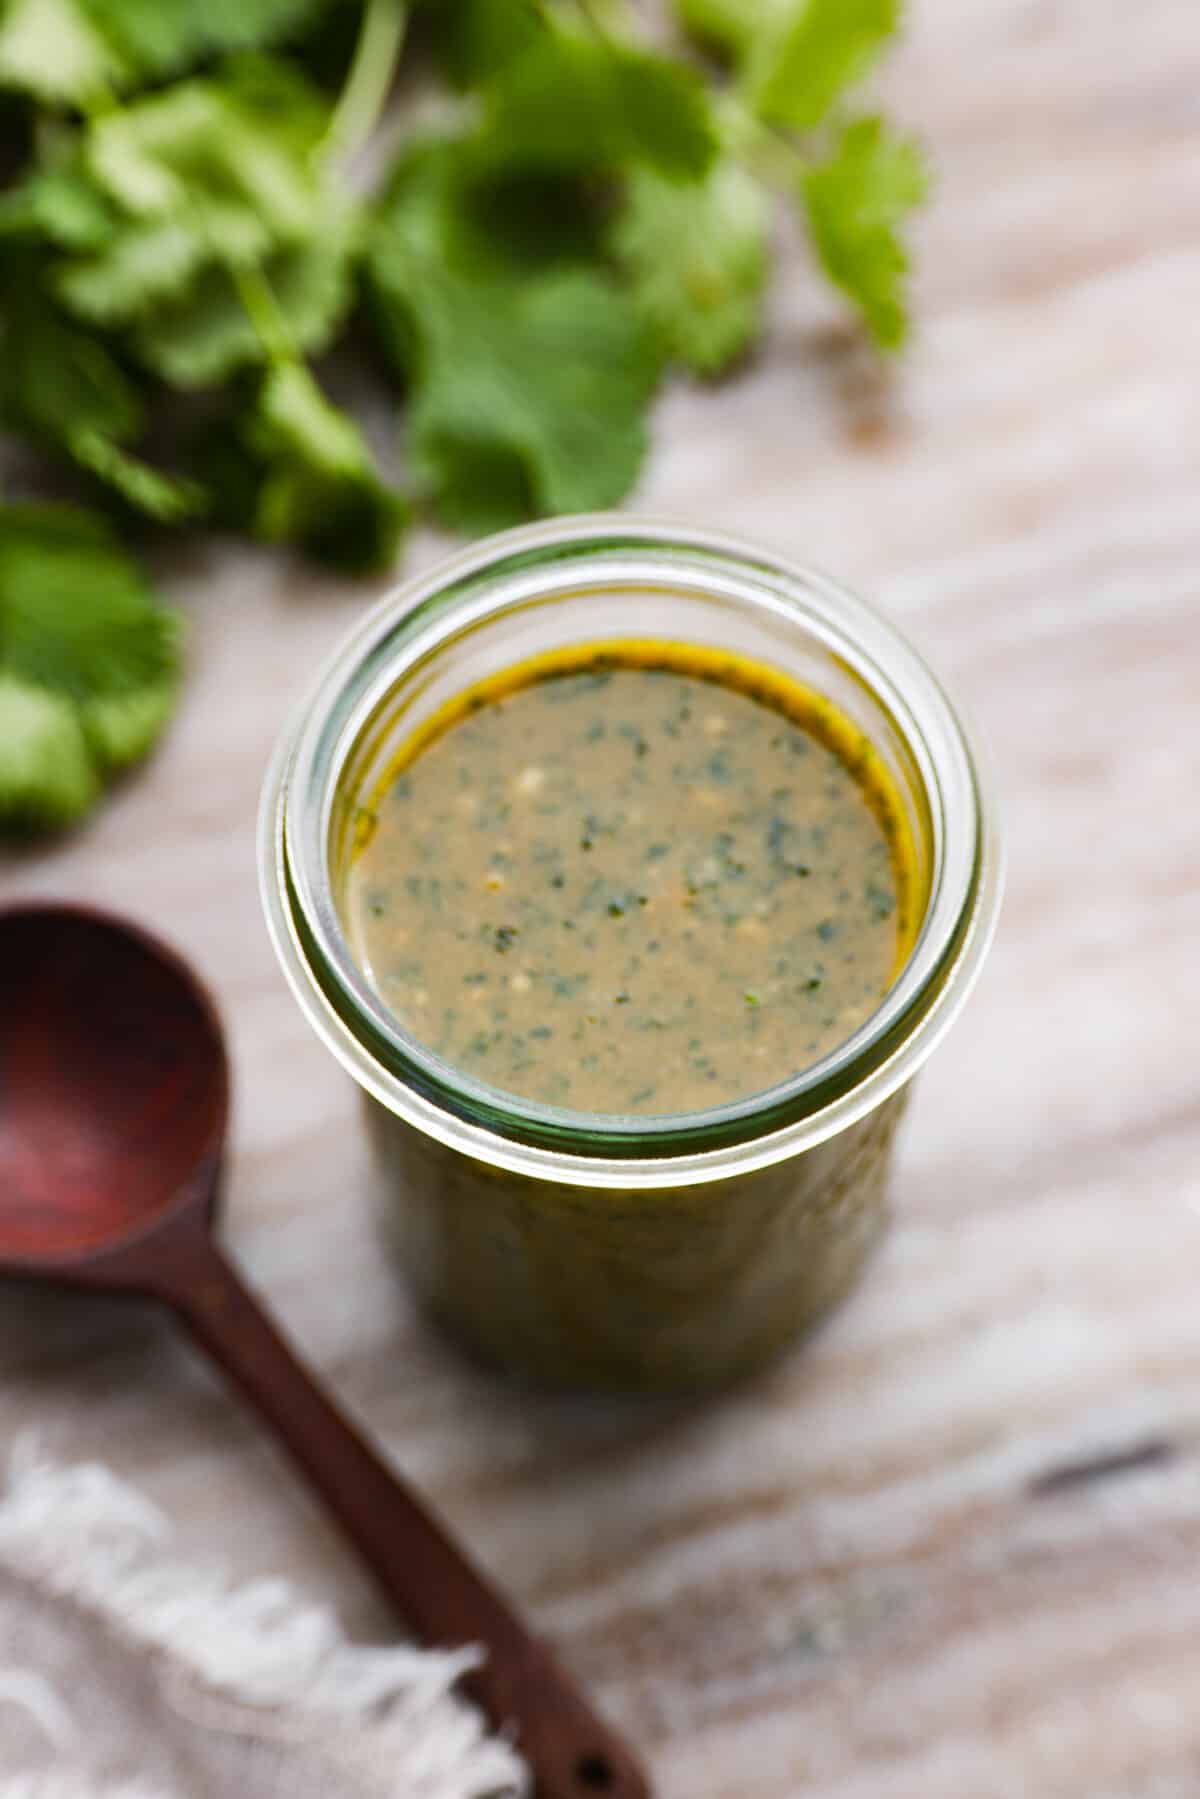 Green dipping sauce in a glass jar.